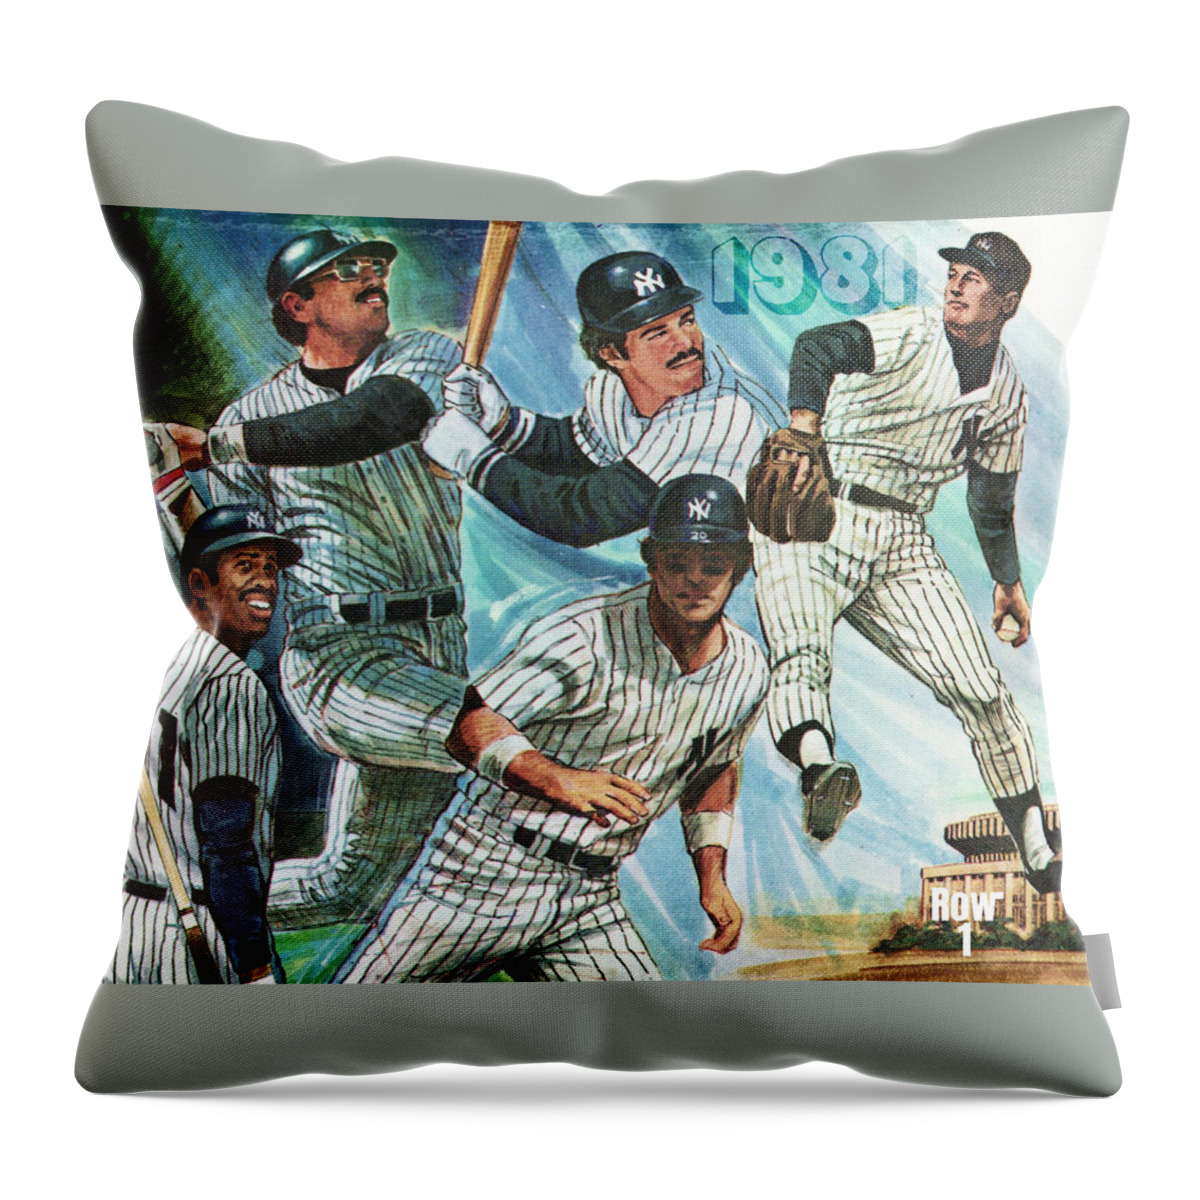 1981 Throw Pillow featuring the mixed media 1981 New York Yankees Stars by Row One Brand